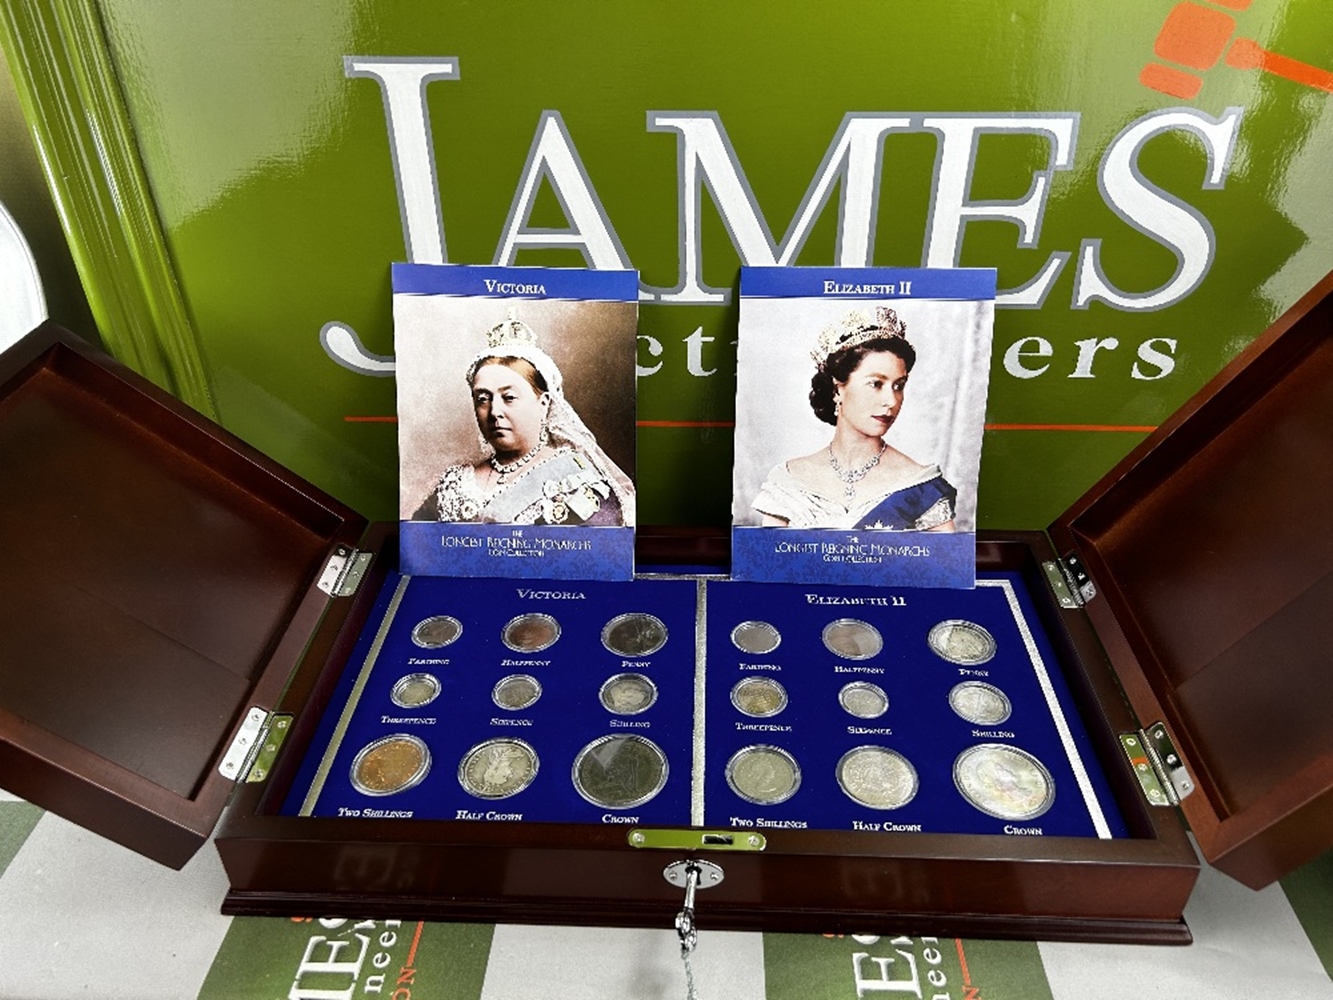 Danbury Mint Victoria and Elizabeth II Authentic Coin collection. - Image 8 of 9